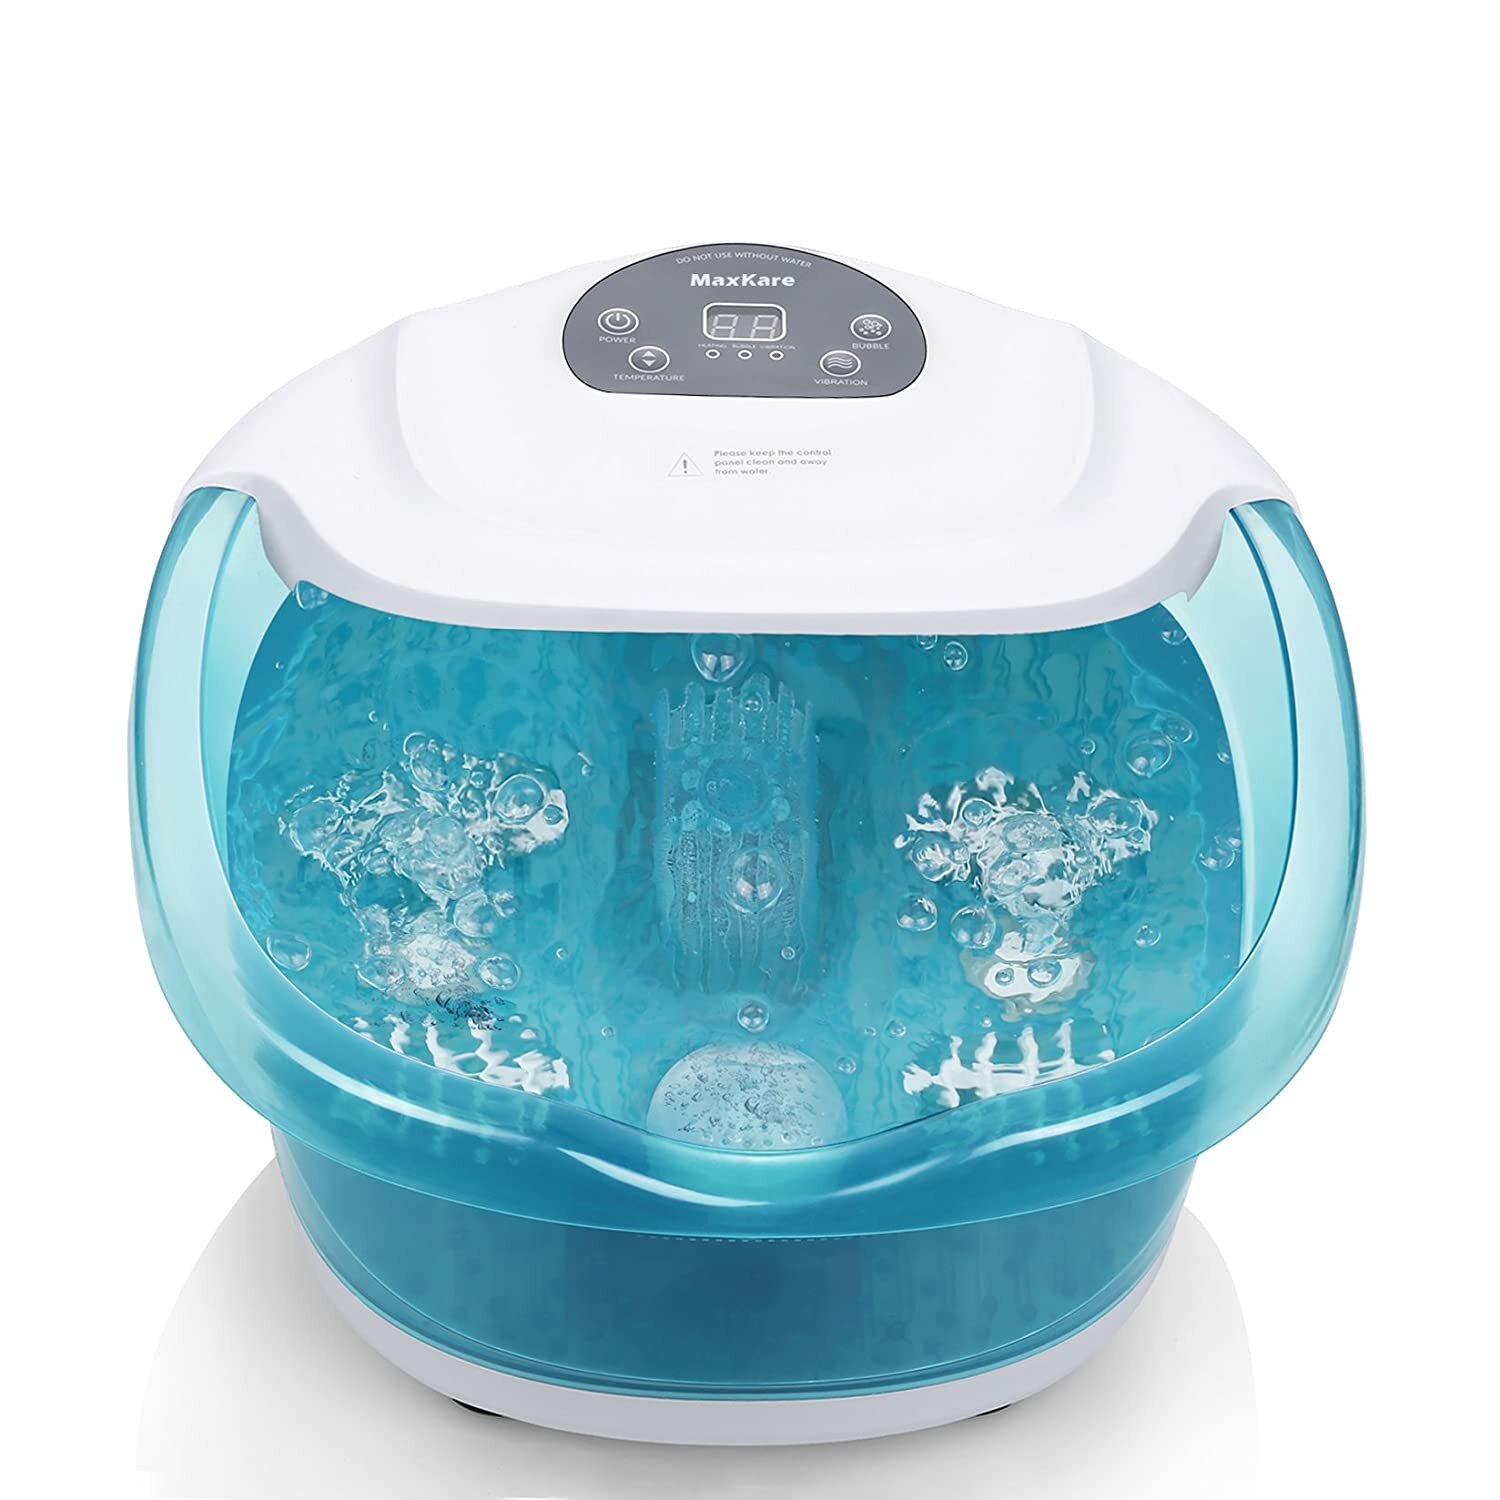 Foot Spa/Bath Massager with Heat - $80